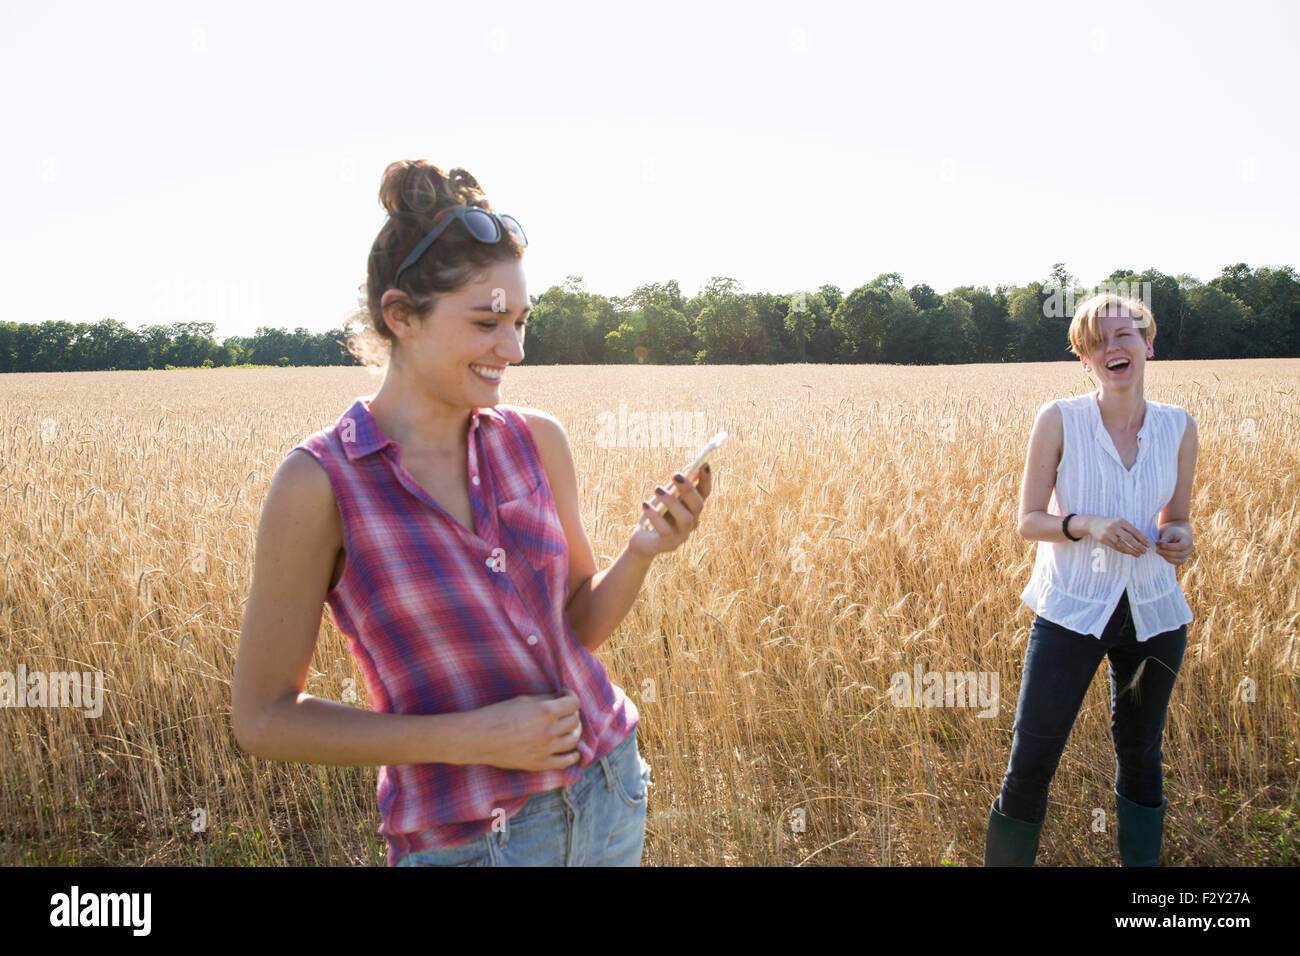 Two young women standing in a cornfield, one holding her mobile phone. Stock Photo